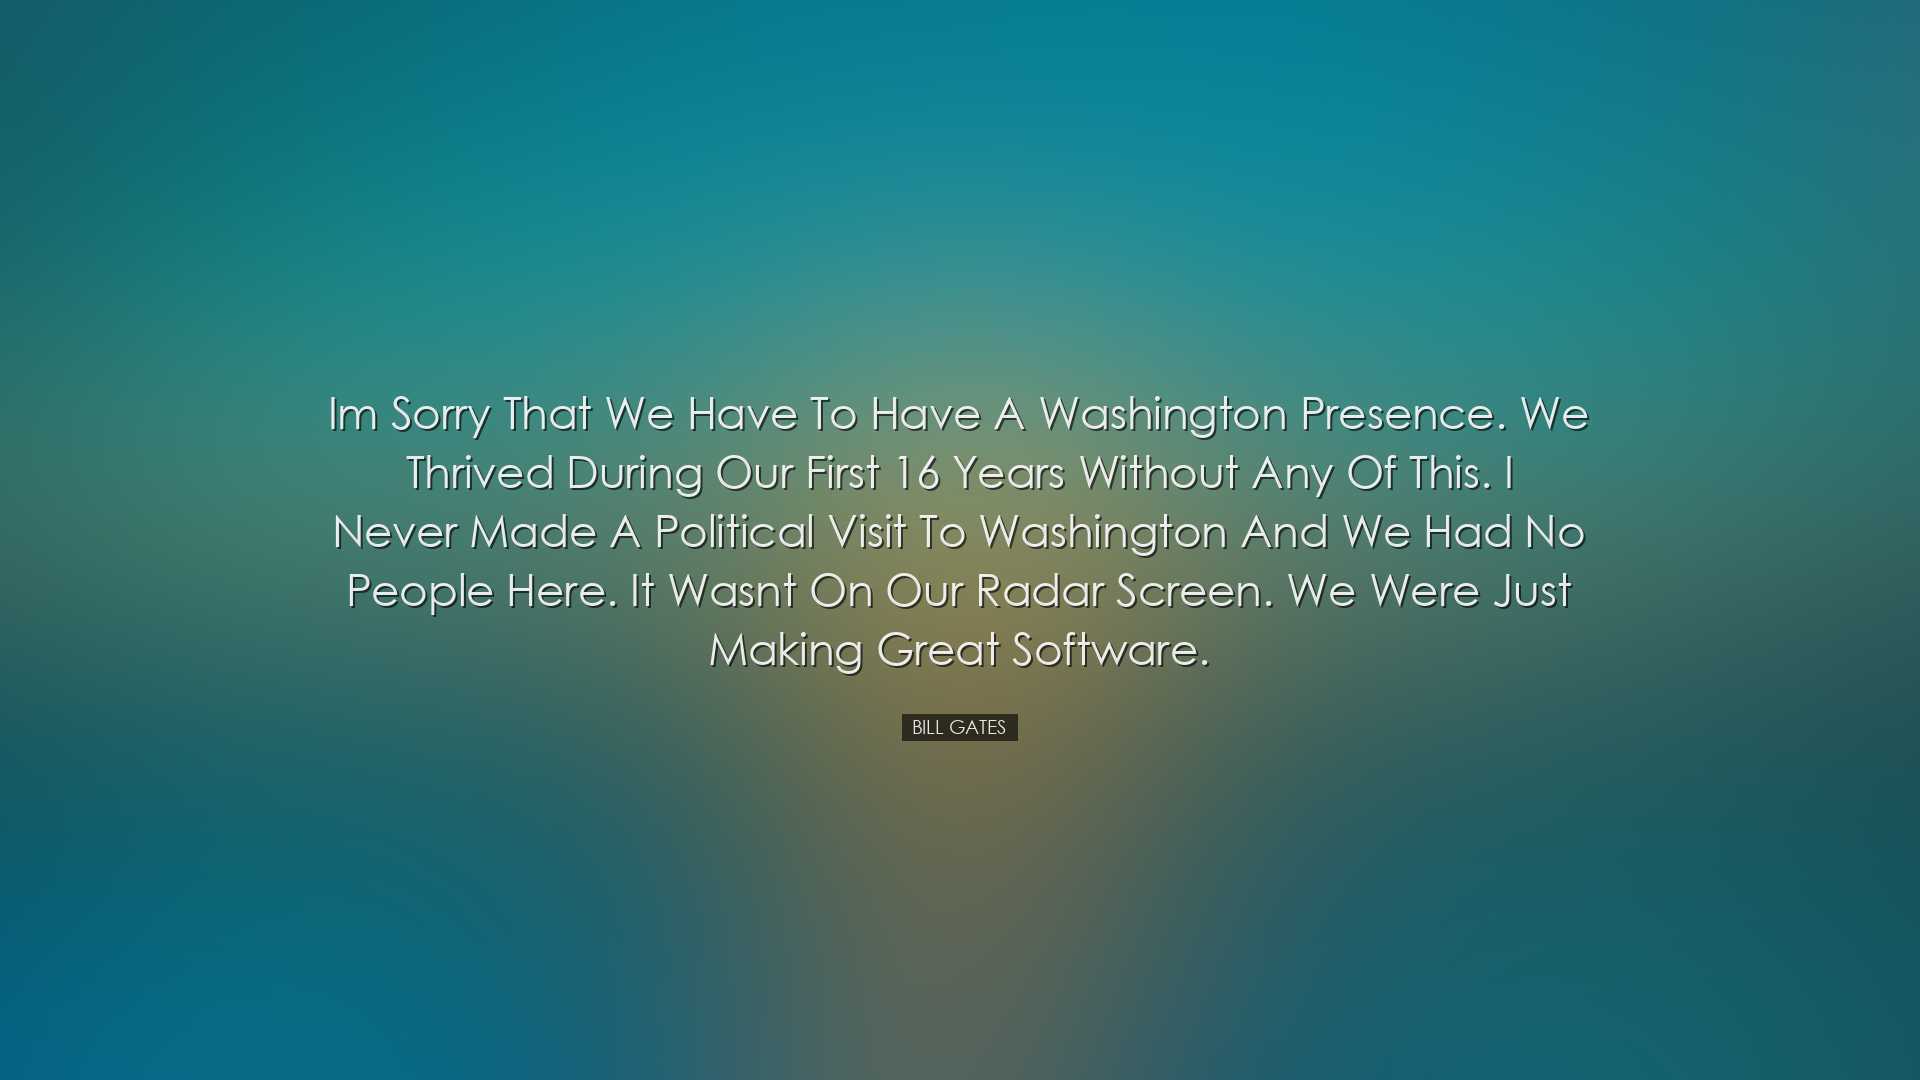 Im sorry that we have to have a Washington presence. We thrived du